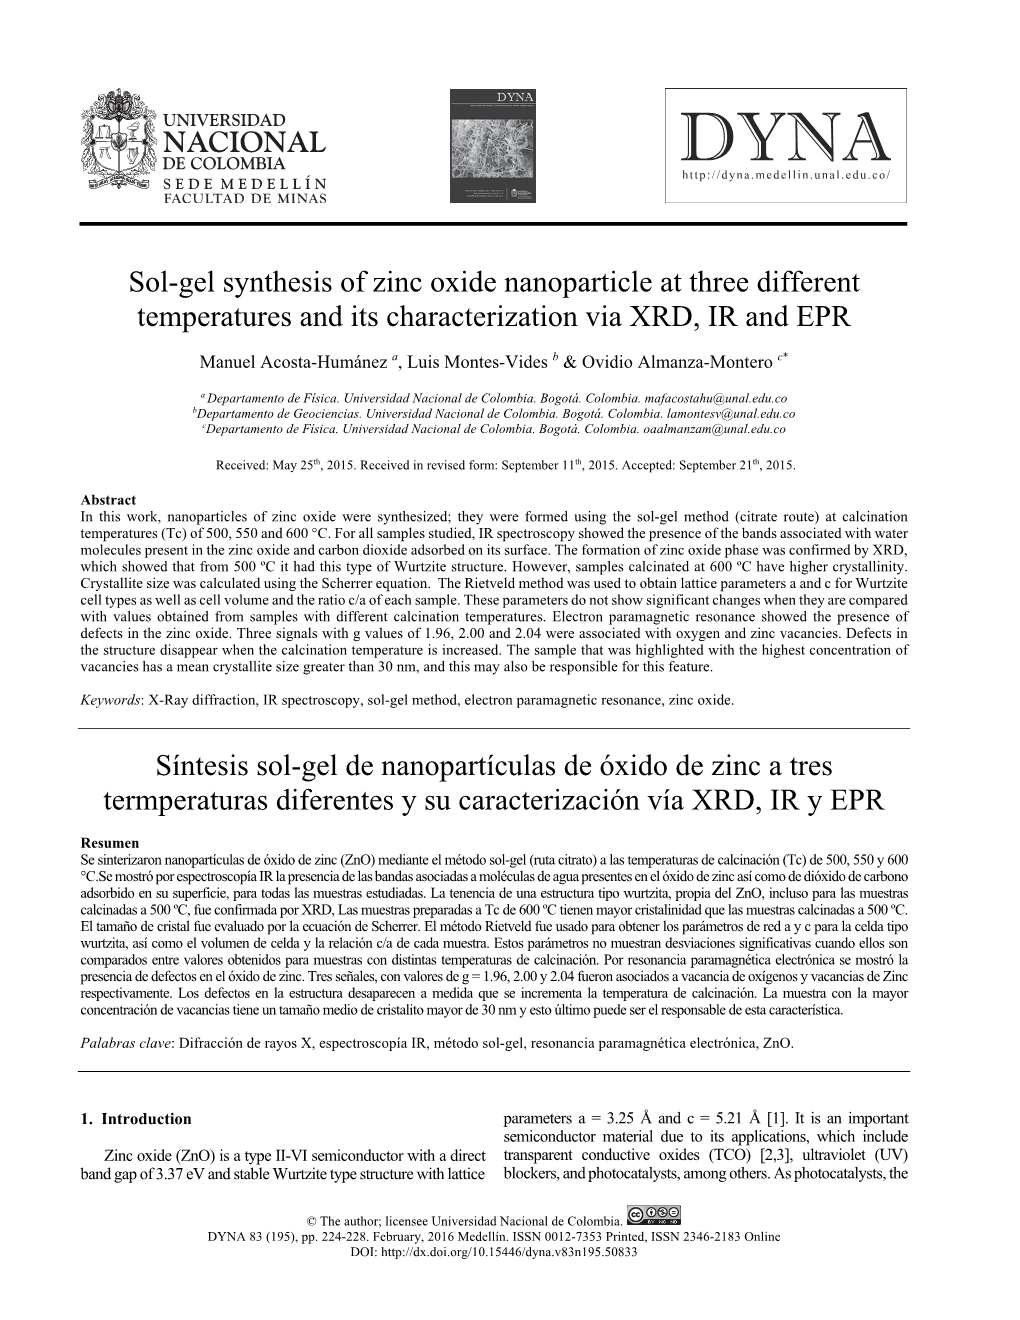 Sol-Gel Synthesis of Zinc Oxide Nanoparticle at Three Different Temperatures and Its Characterization Via XRD, IR and EPR